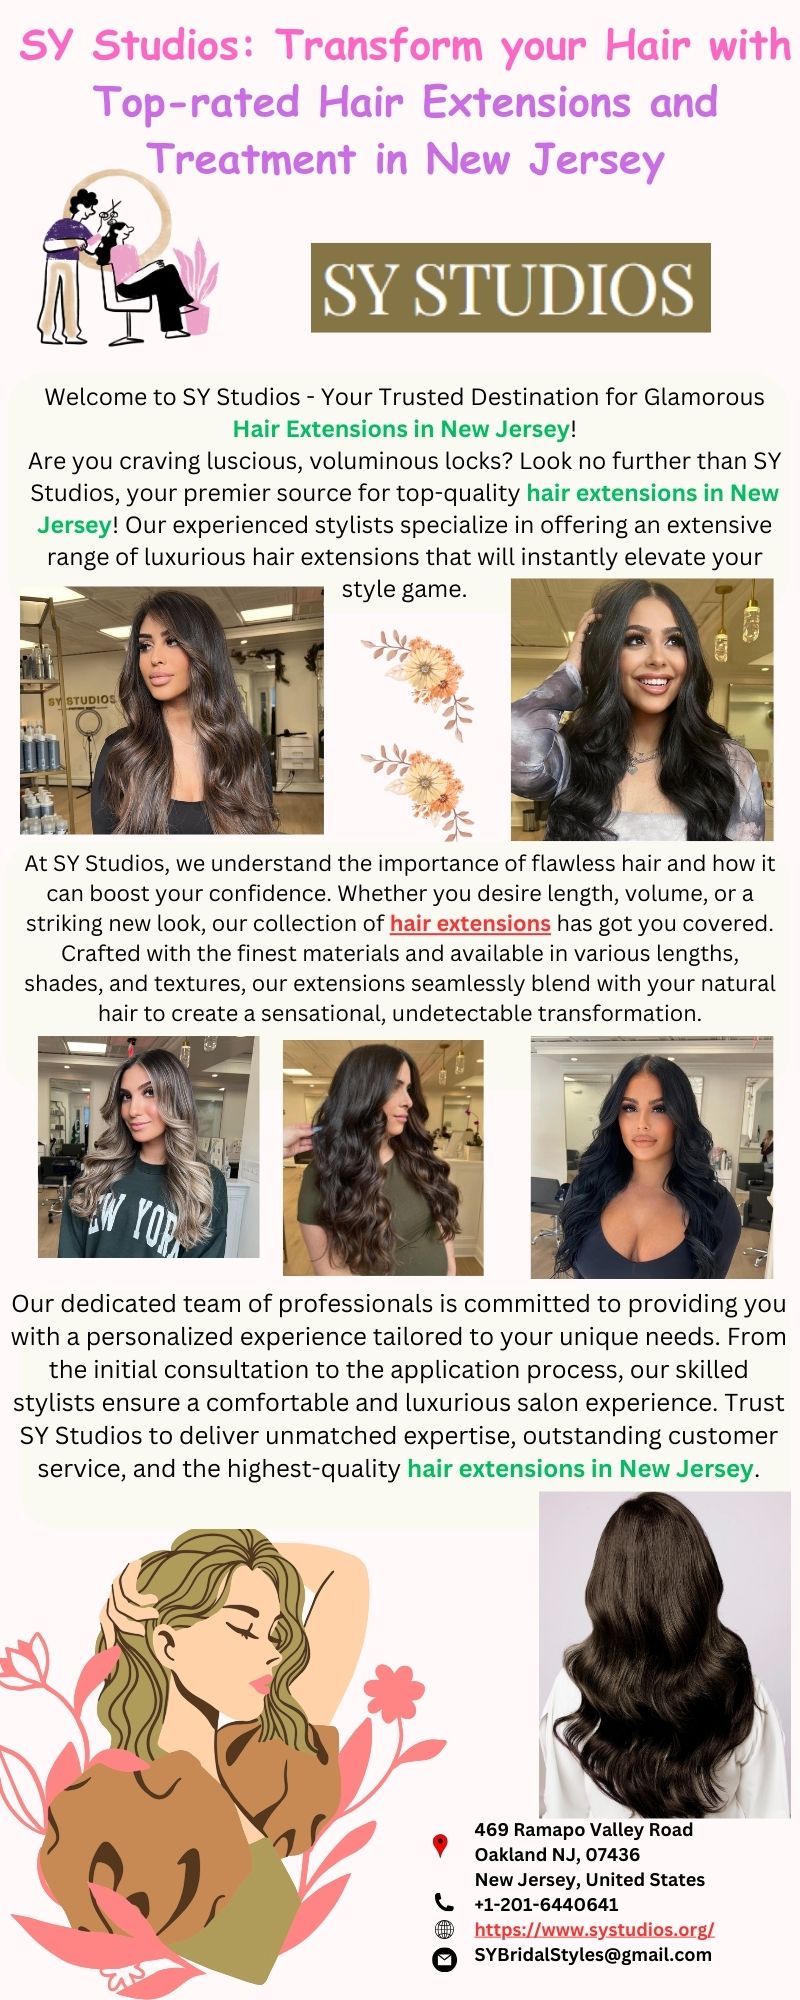 SY Studios: Transform your Hair with Top-rated Hair Extensions and Treatment in New Jersey